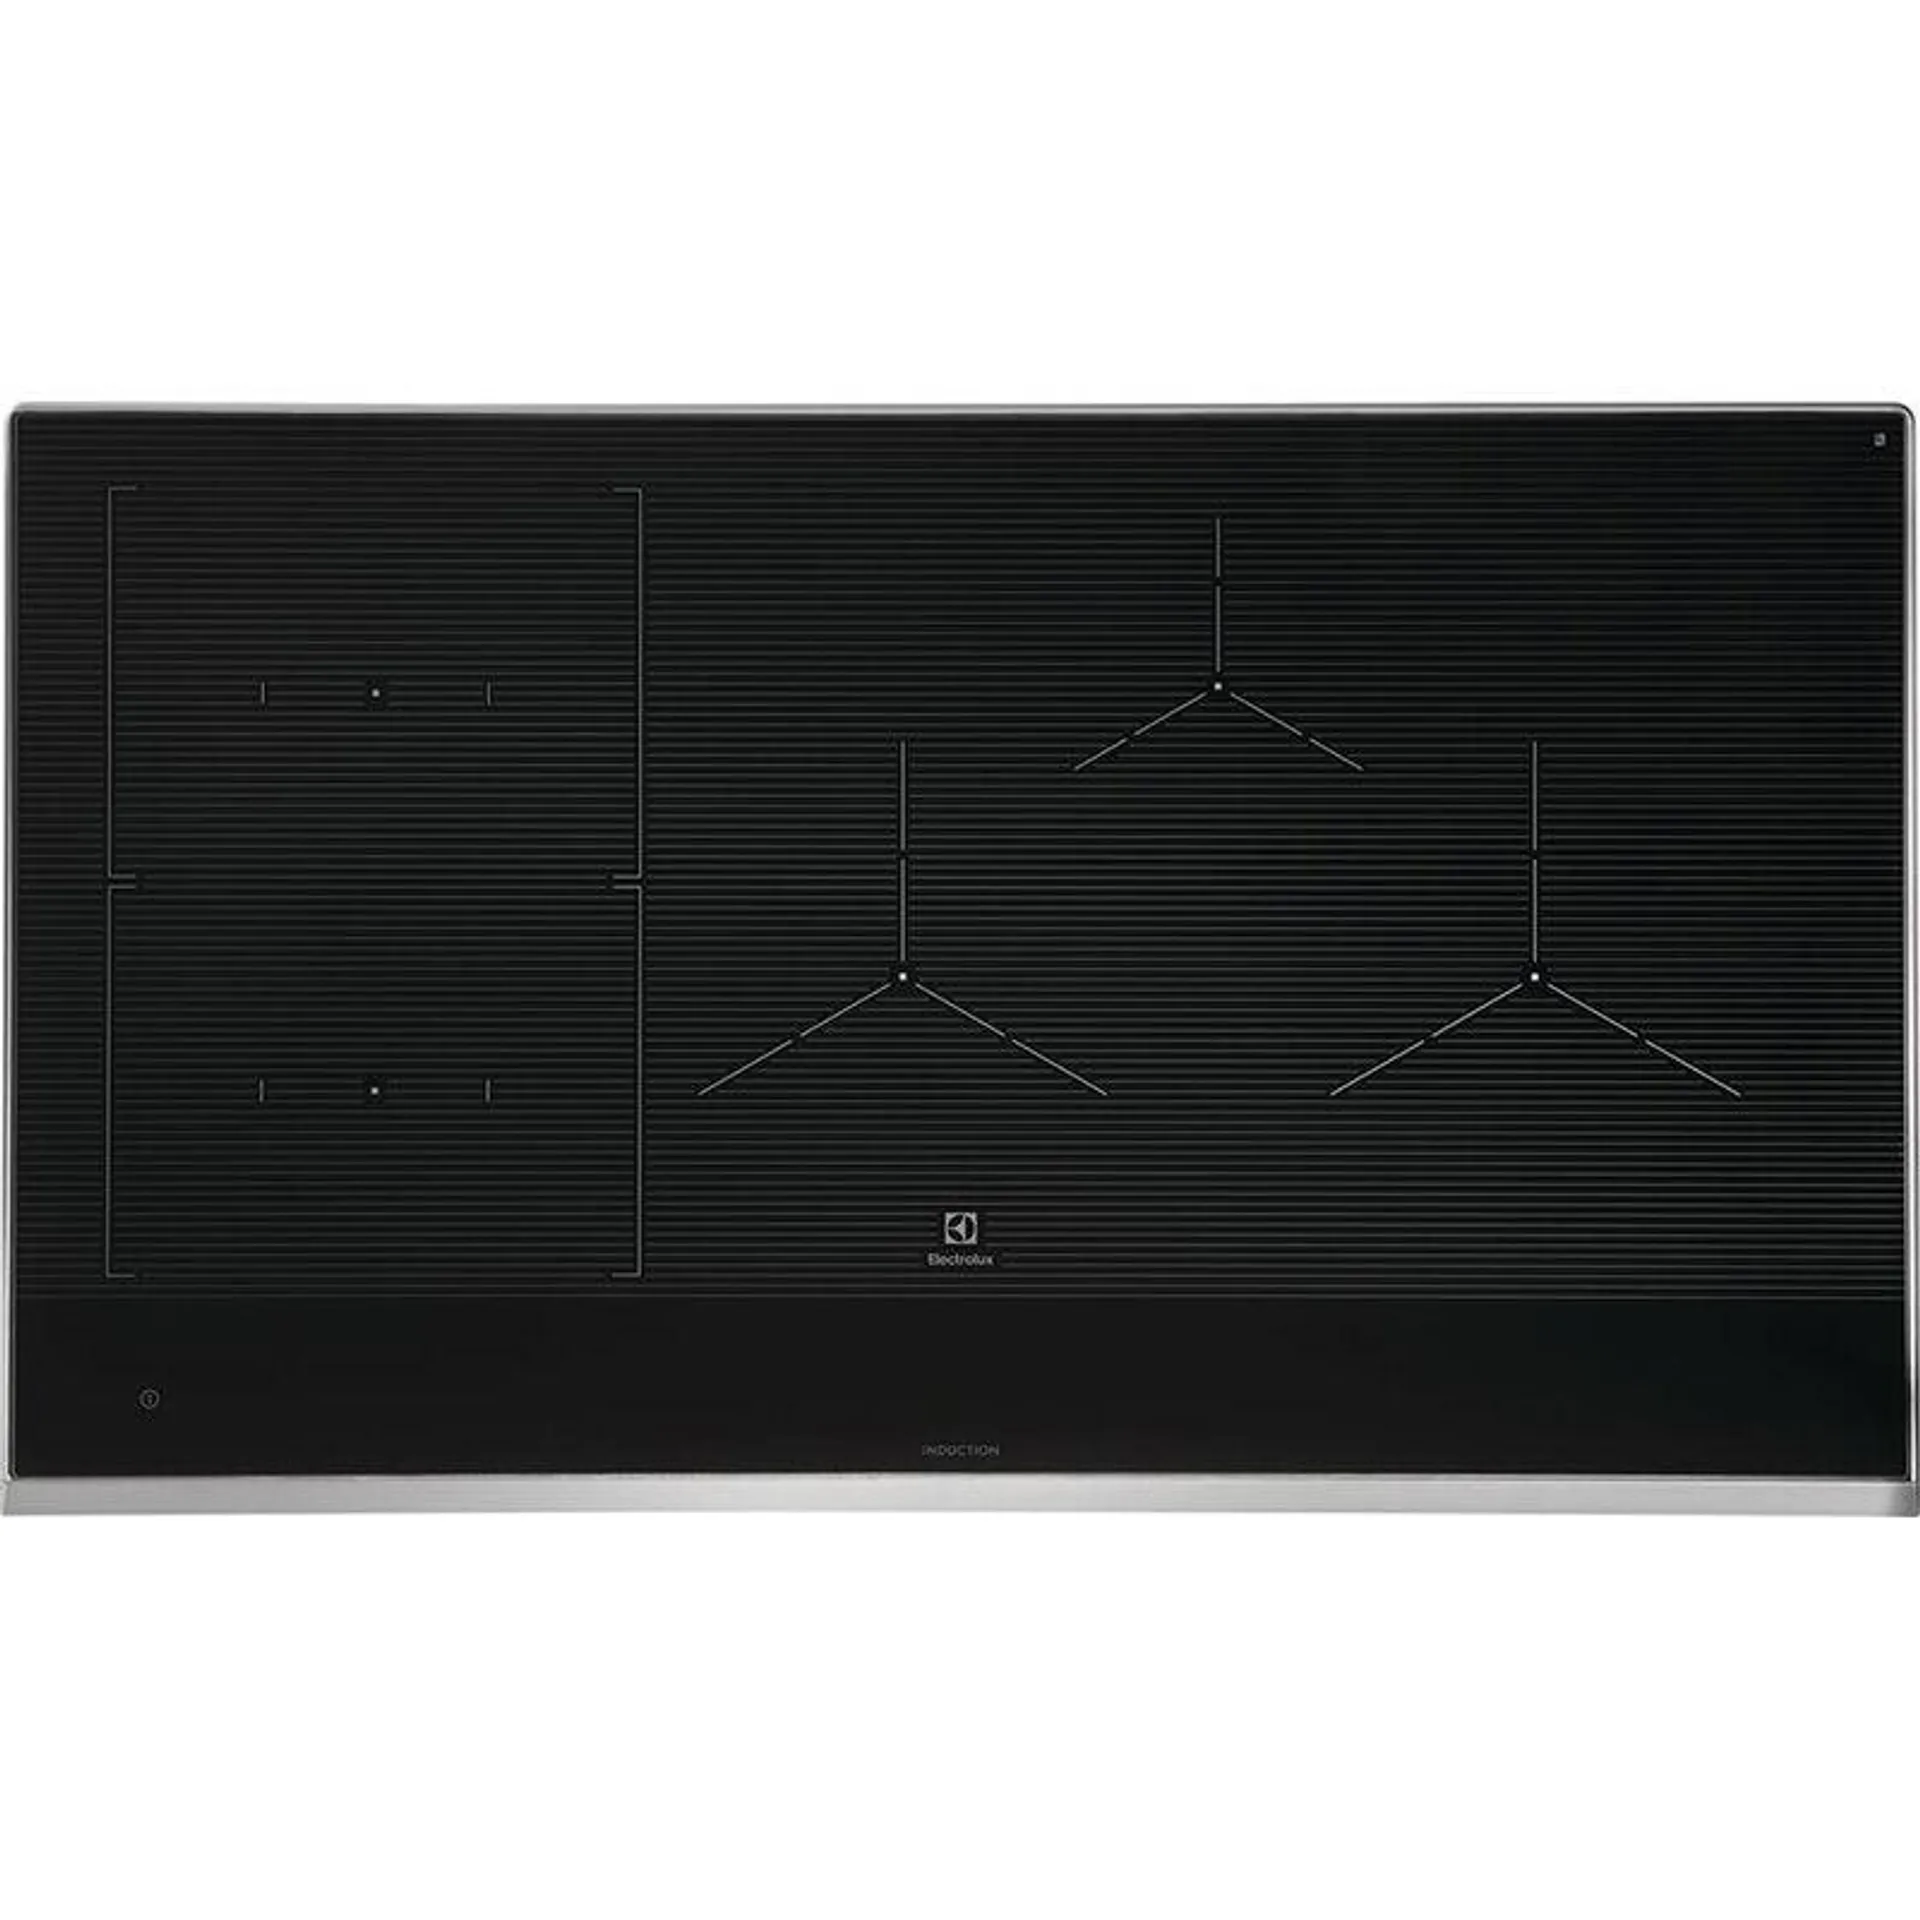 Electrolux 36 in. 5-Burner Induction Cooktop - Stainless Steel